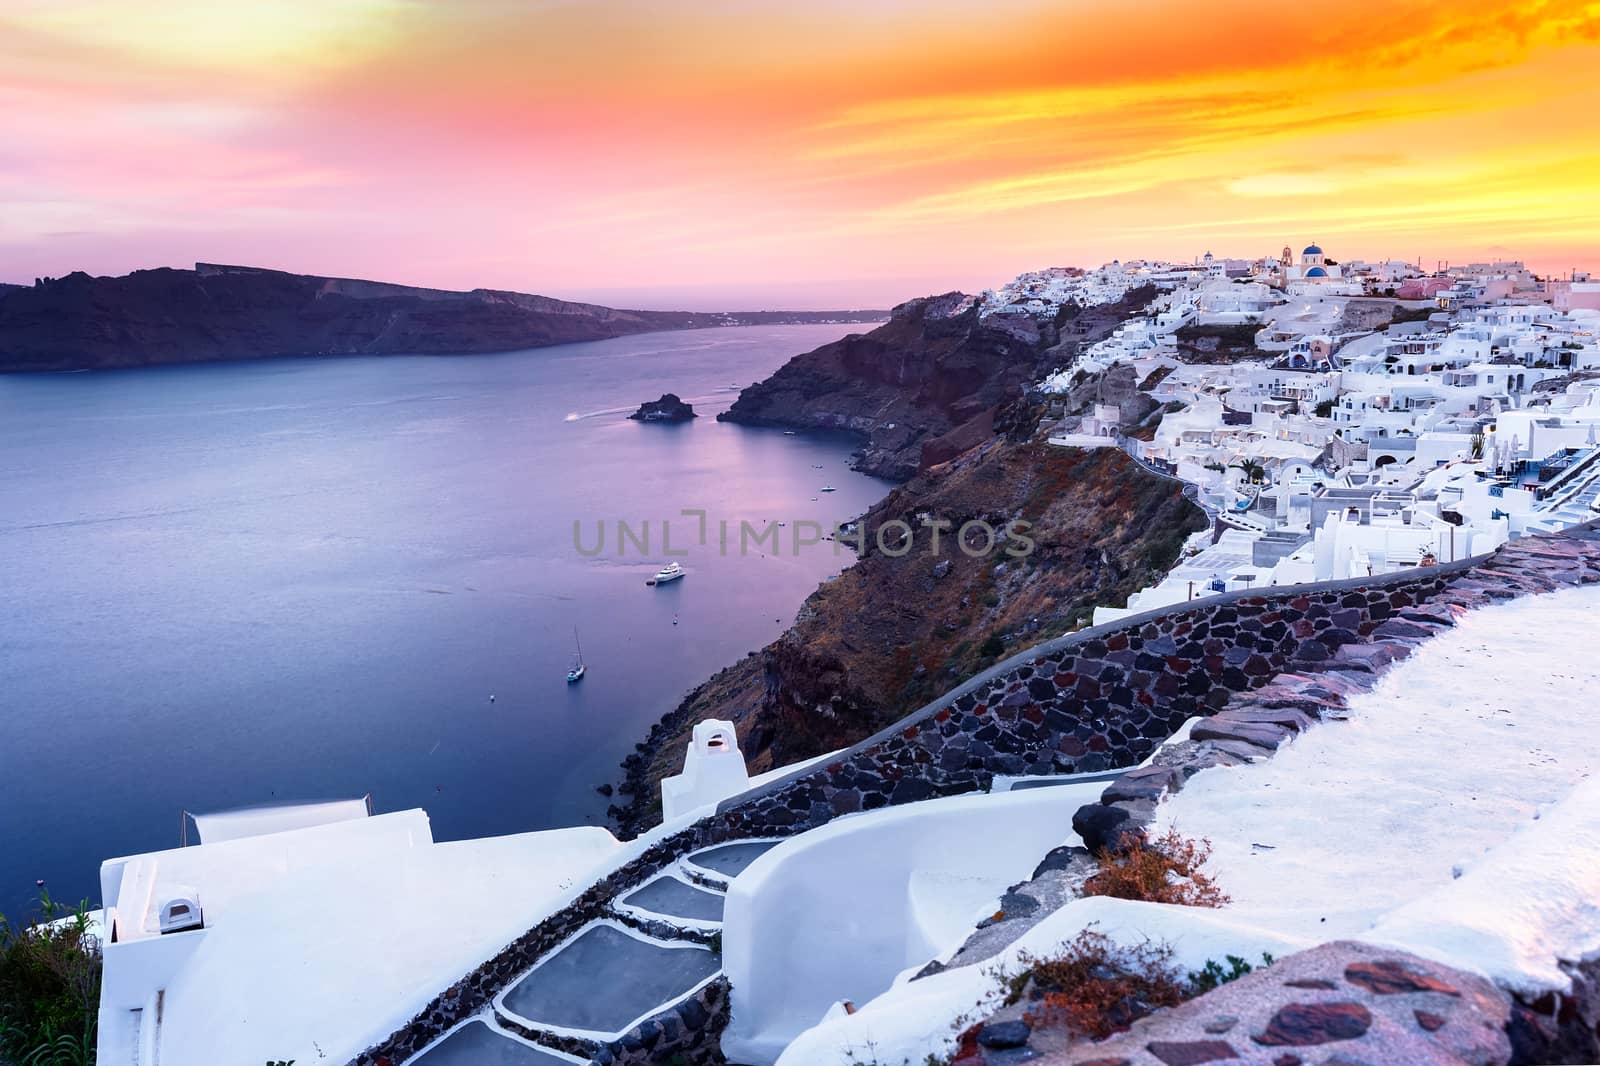 World famous Oia village at sunset, Santorini.  Caldera and traditional, famous white washed buildings and churches with blue domes over the caldera,Santorini island, Greece. by Slast20